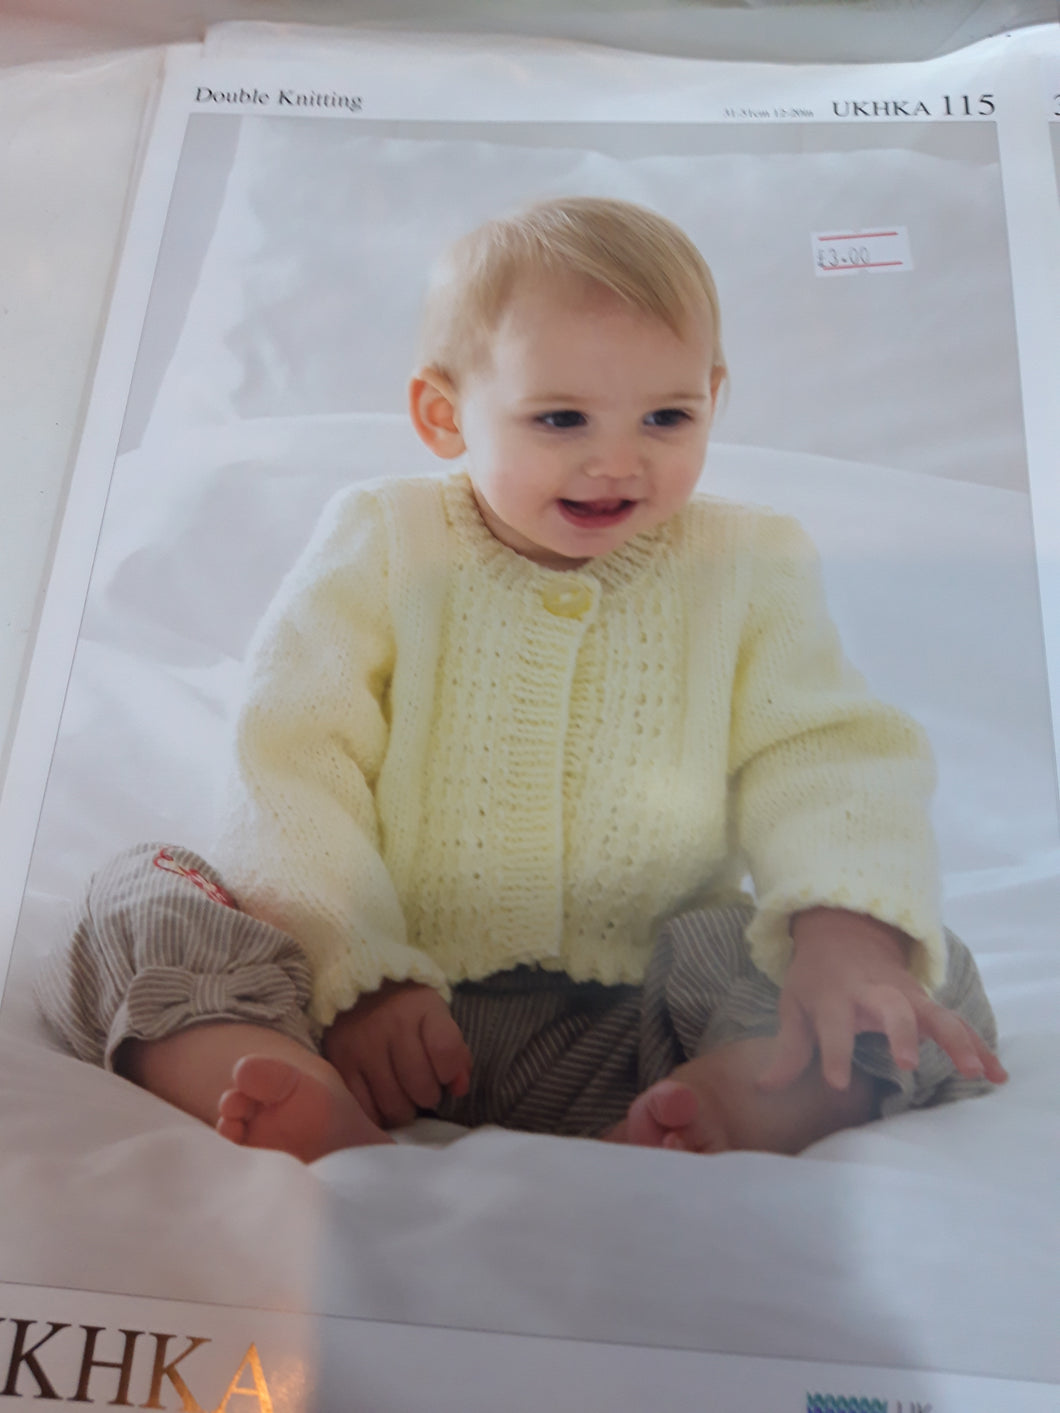 UKHKA 115 - Baby Double Knit - Jumper and Cardigan - 12